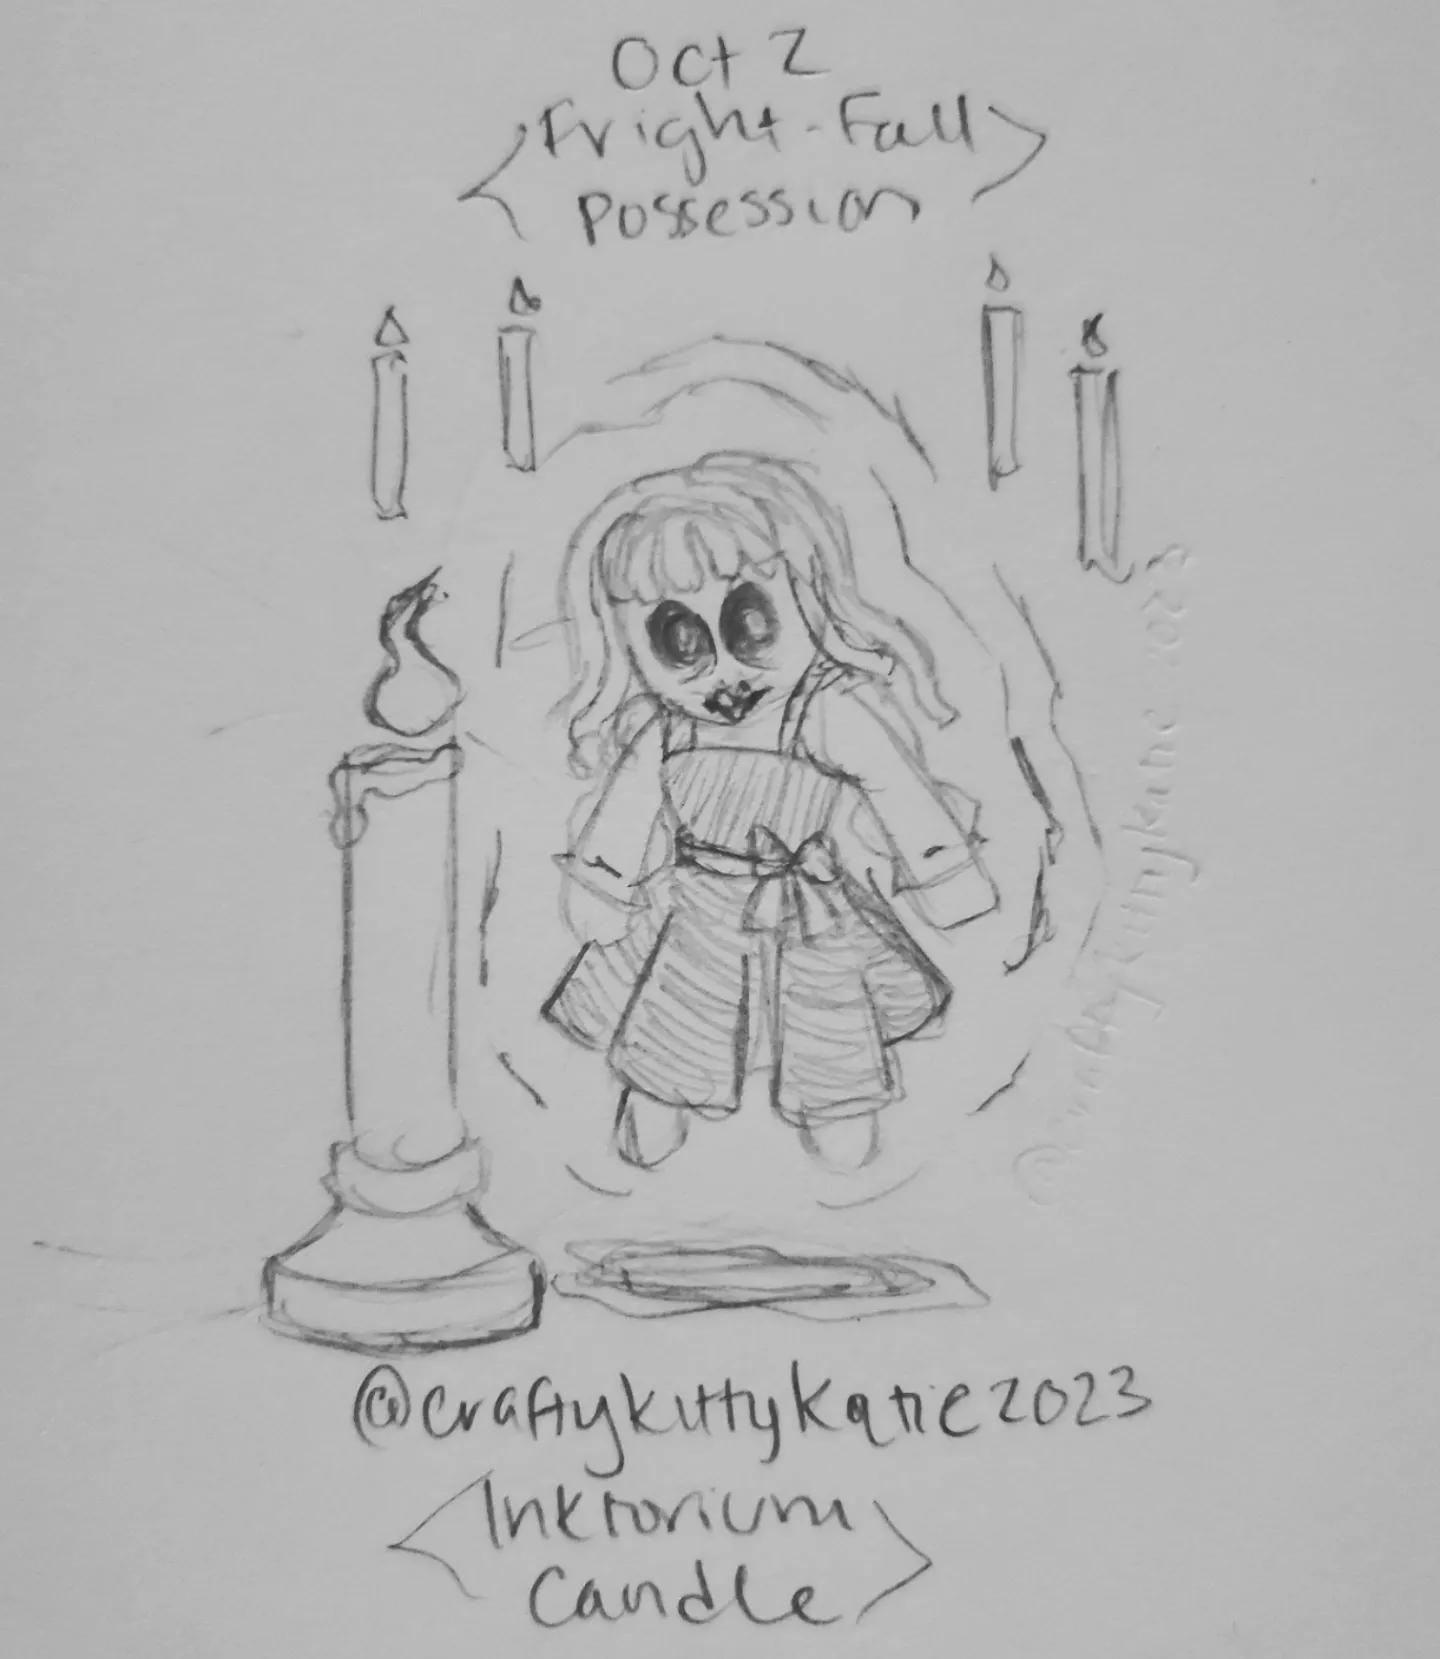 Day 2 - Possession / Candle